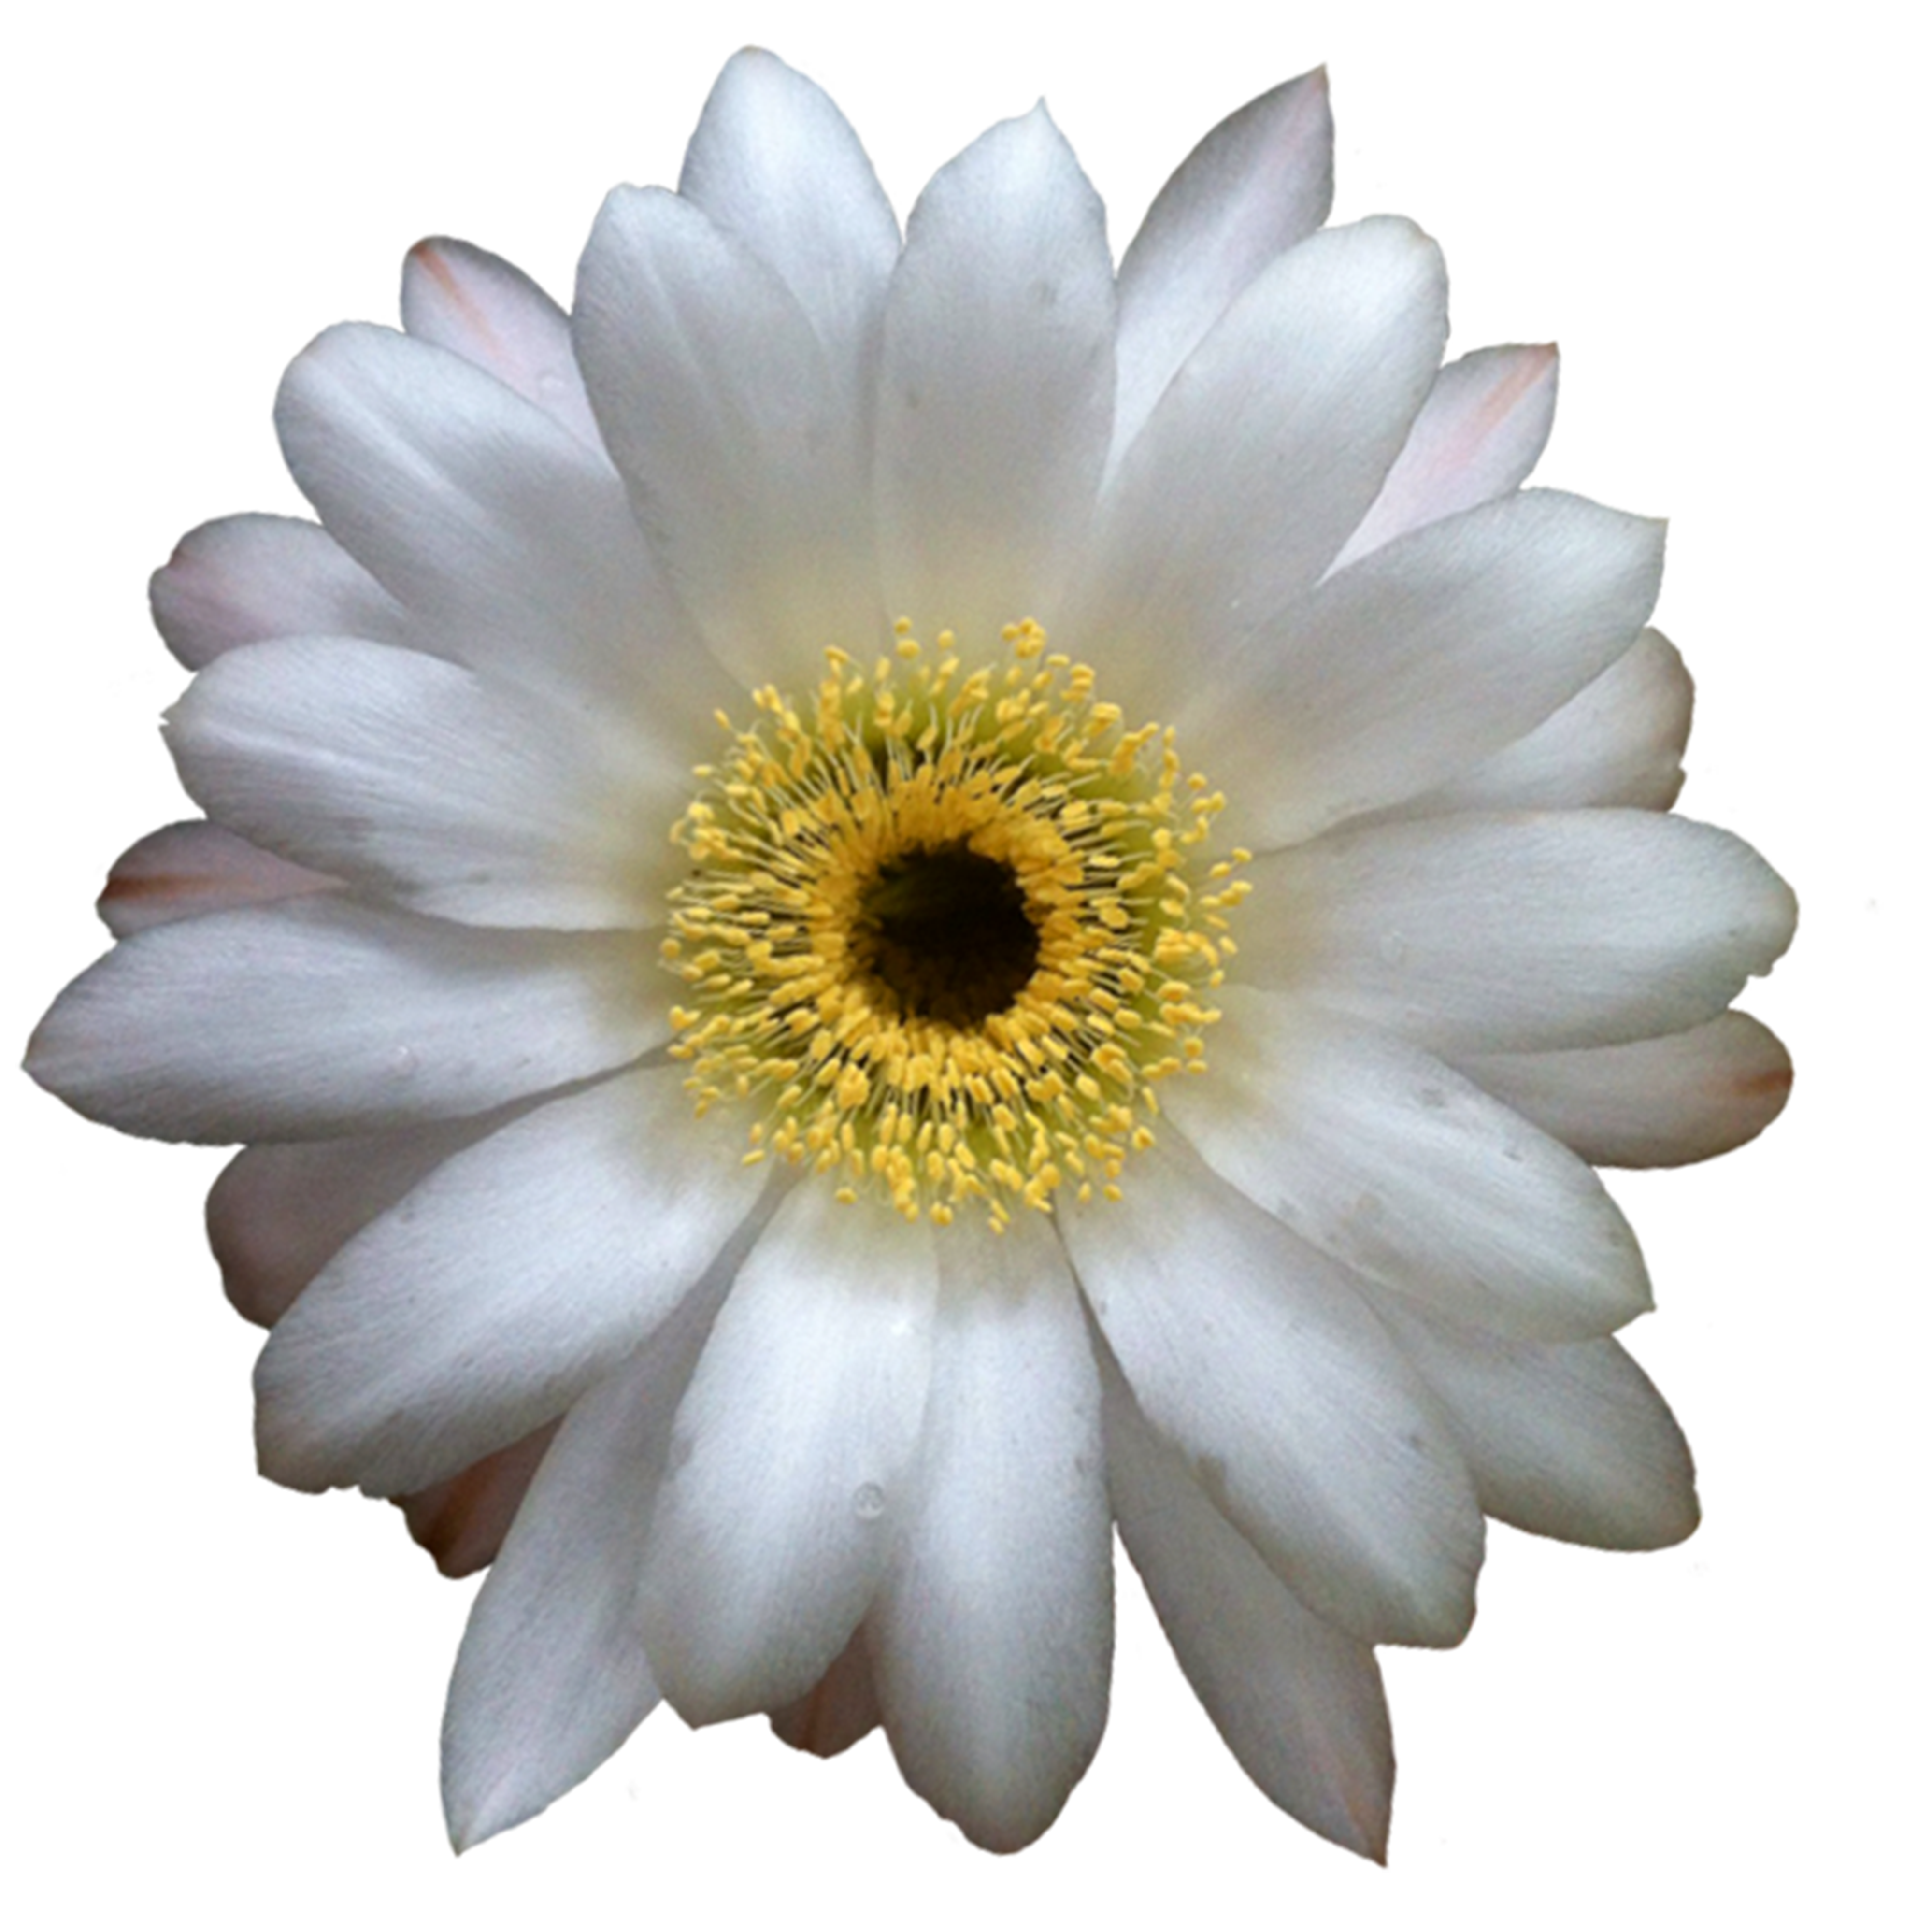 Cactus flower png #39168.